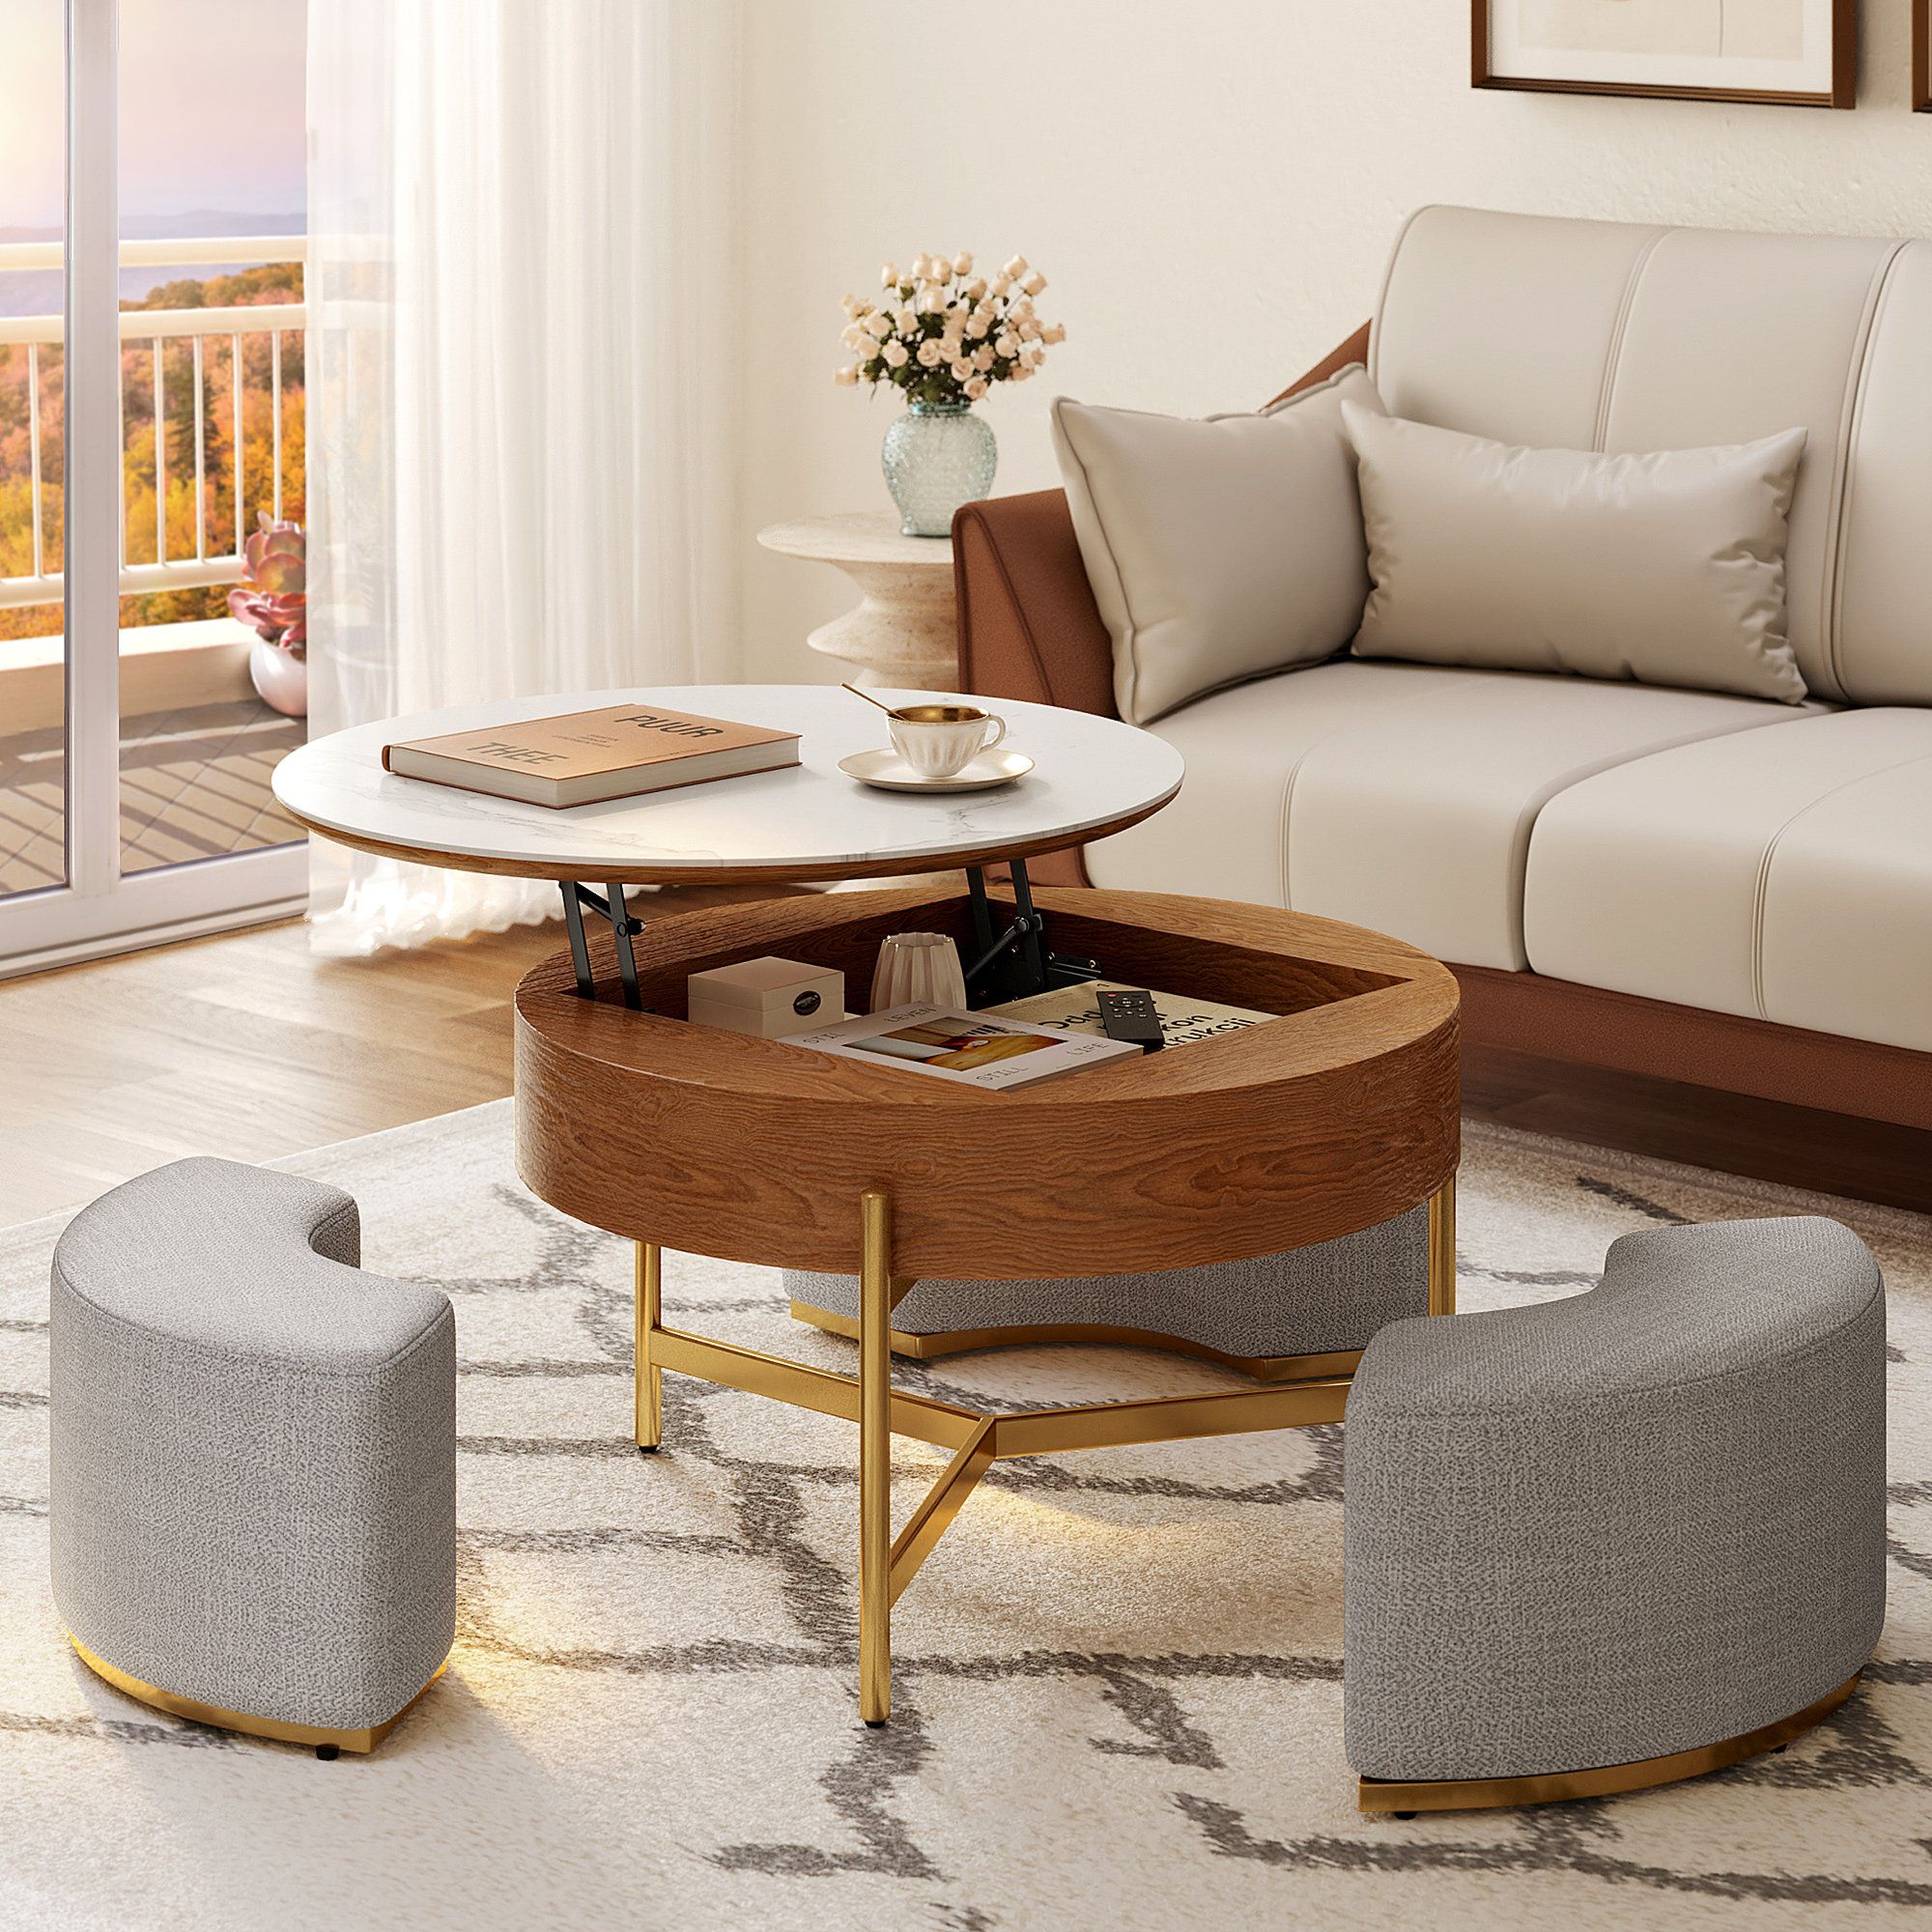 Everly Quinn Sohad Lift Top Extendable Frame Coffee Table With Storage &  Reviews | Wayfair With Regard To Lift Top Coffee Tables (View 2 of 15)